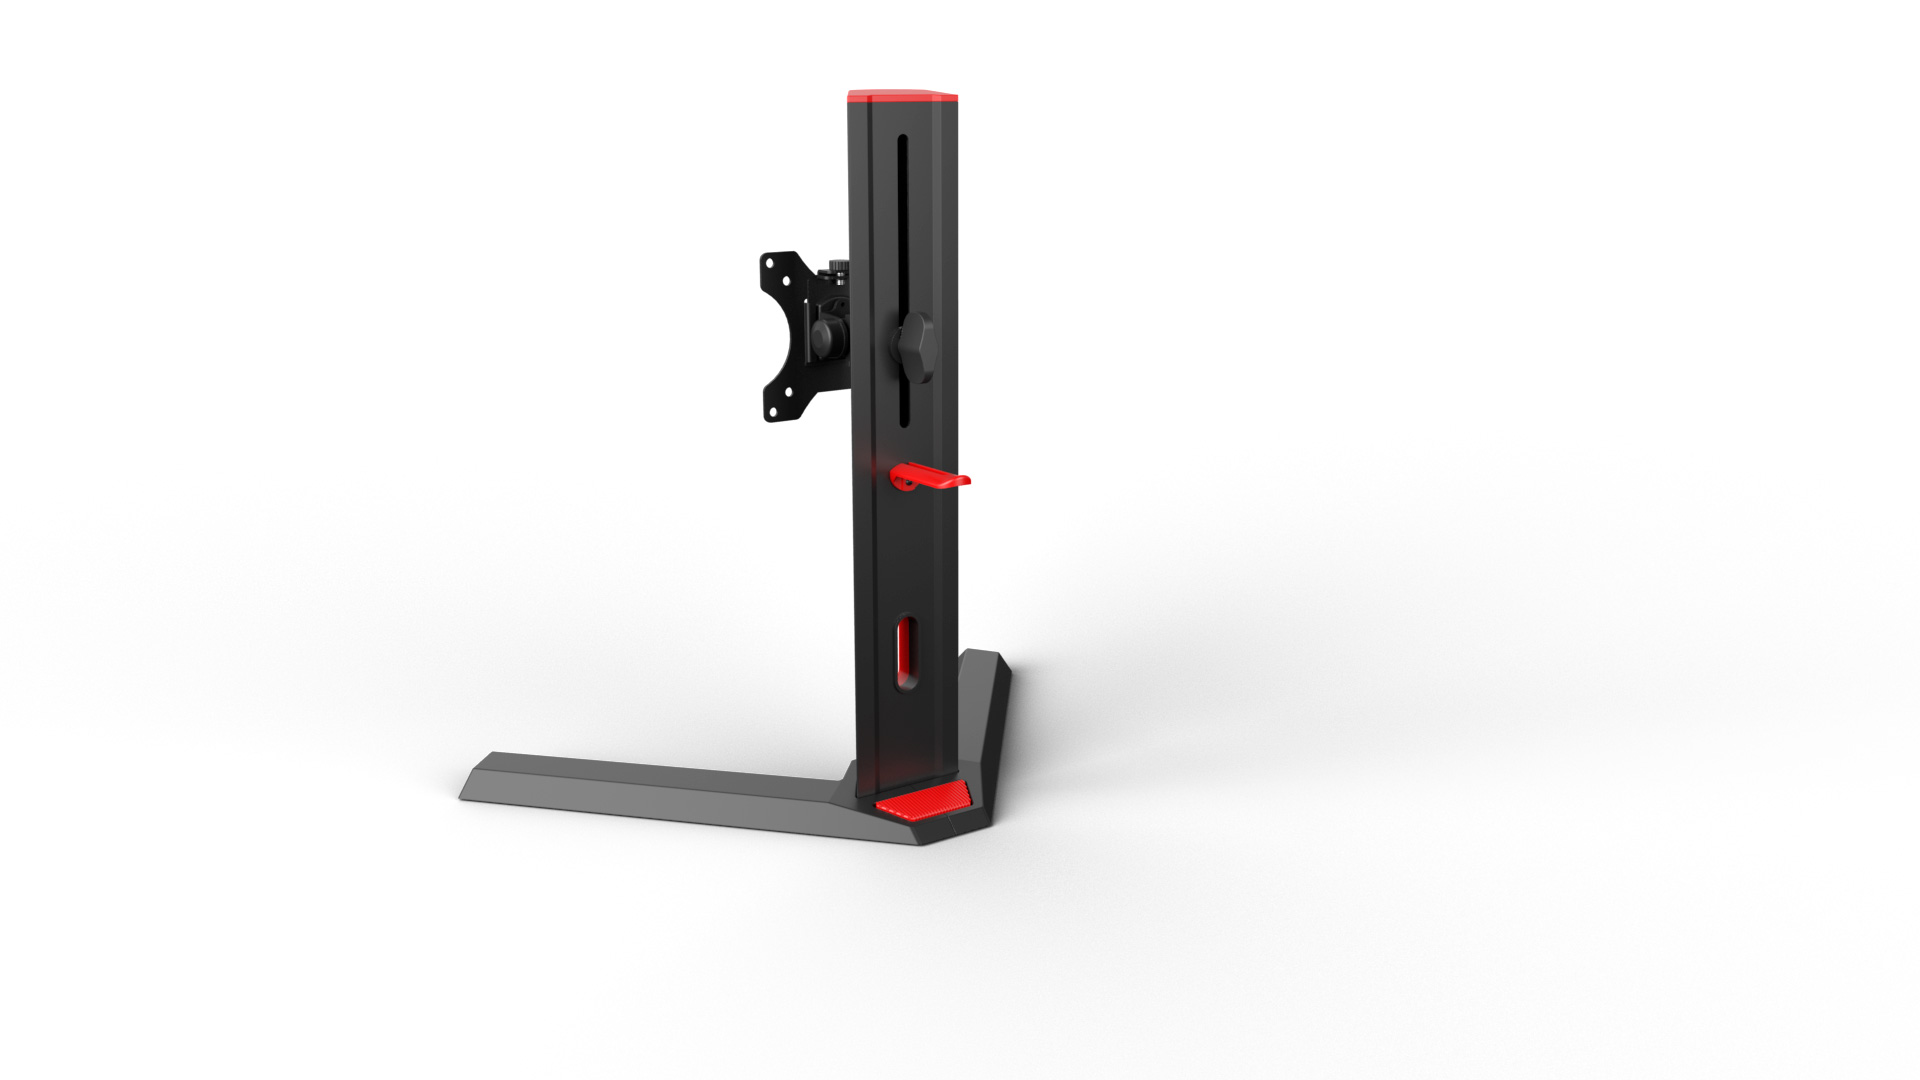 Single Screen Freestanding Pro Gaming Monitor Stand with Headphone Holder  Supplier and Manufacturer- LUMI